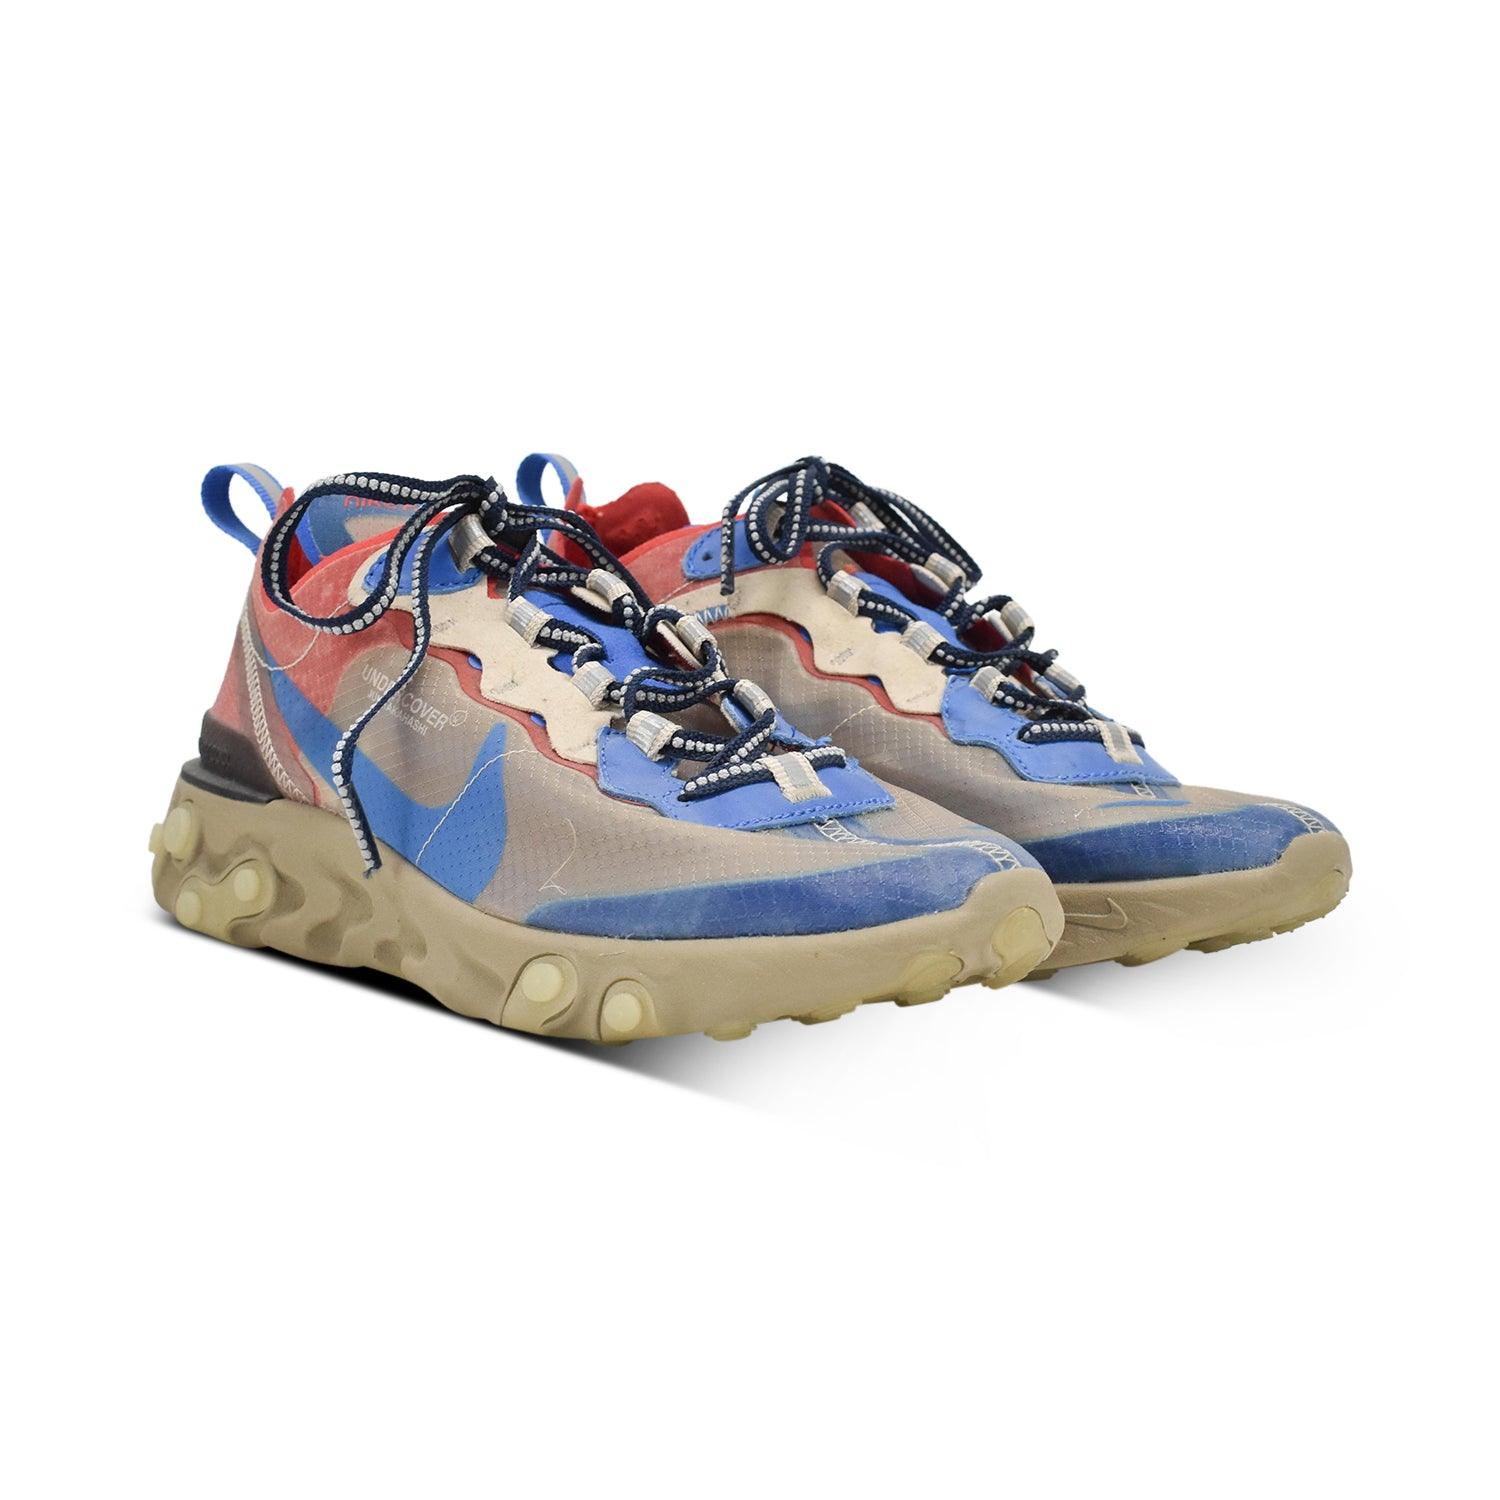 Nike x Undercover 'React Element 87' Sneakers - Women's 7 - Fashionably Yours